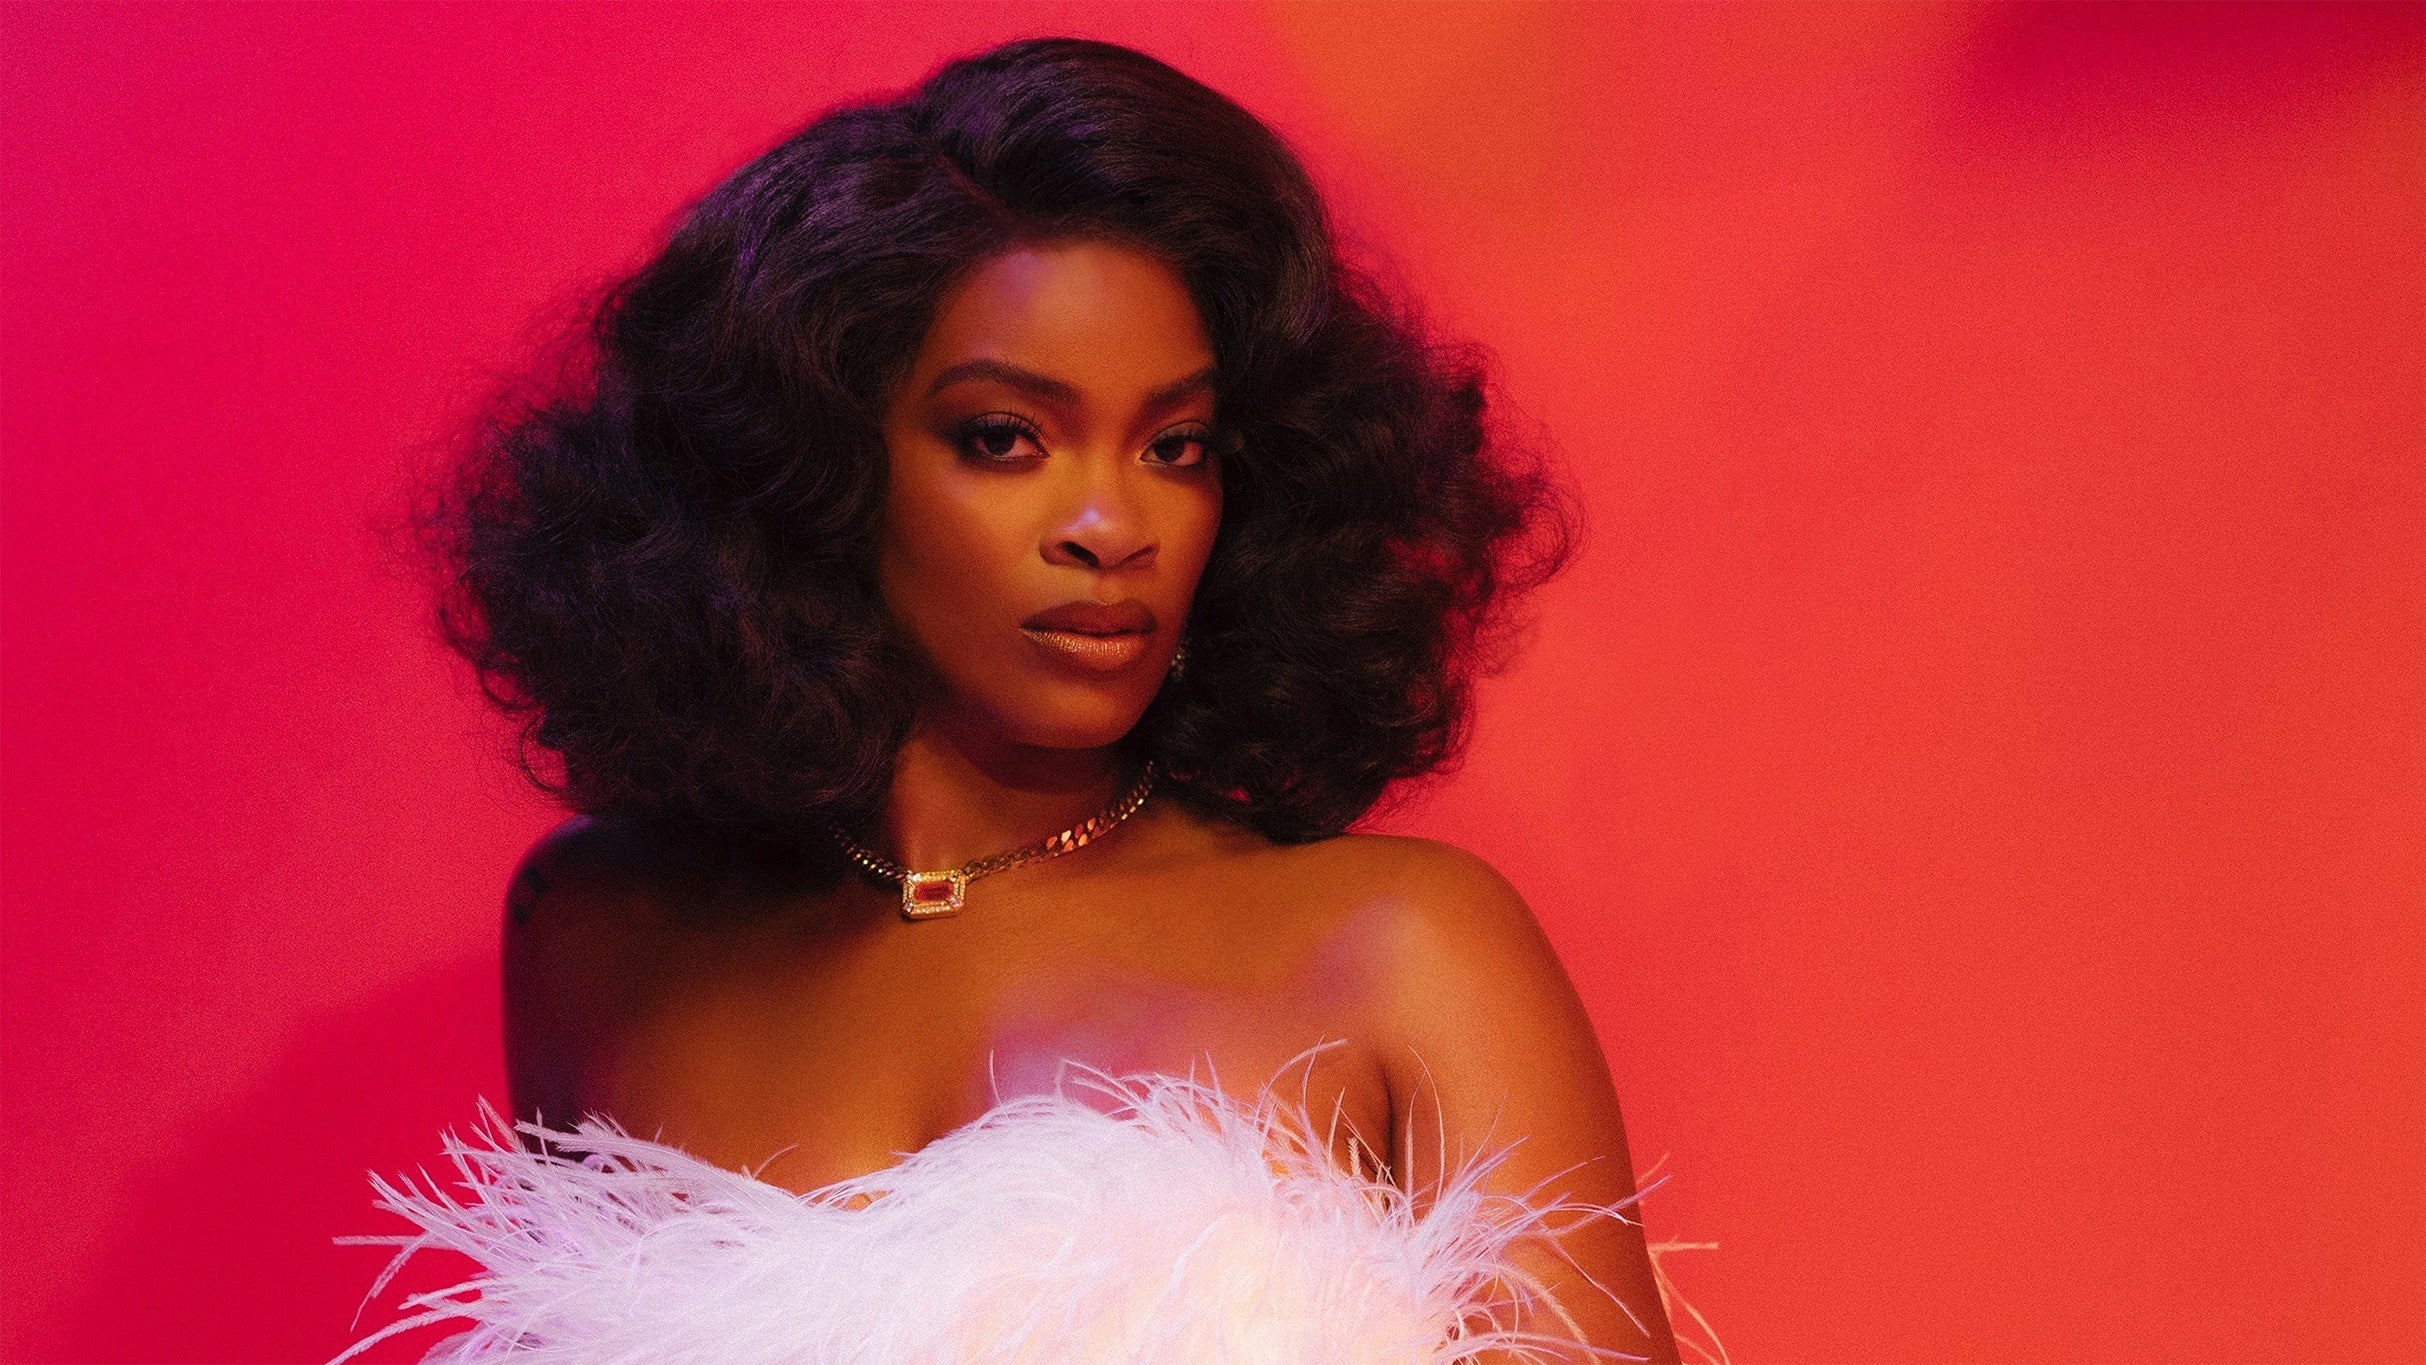 presale pa55w0rd for Ari Lennox - Age/Sex/Location Tour tickets in Oakland - CA (Fox Theater - Oakland)